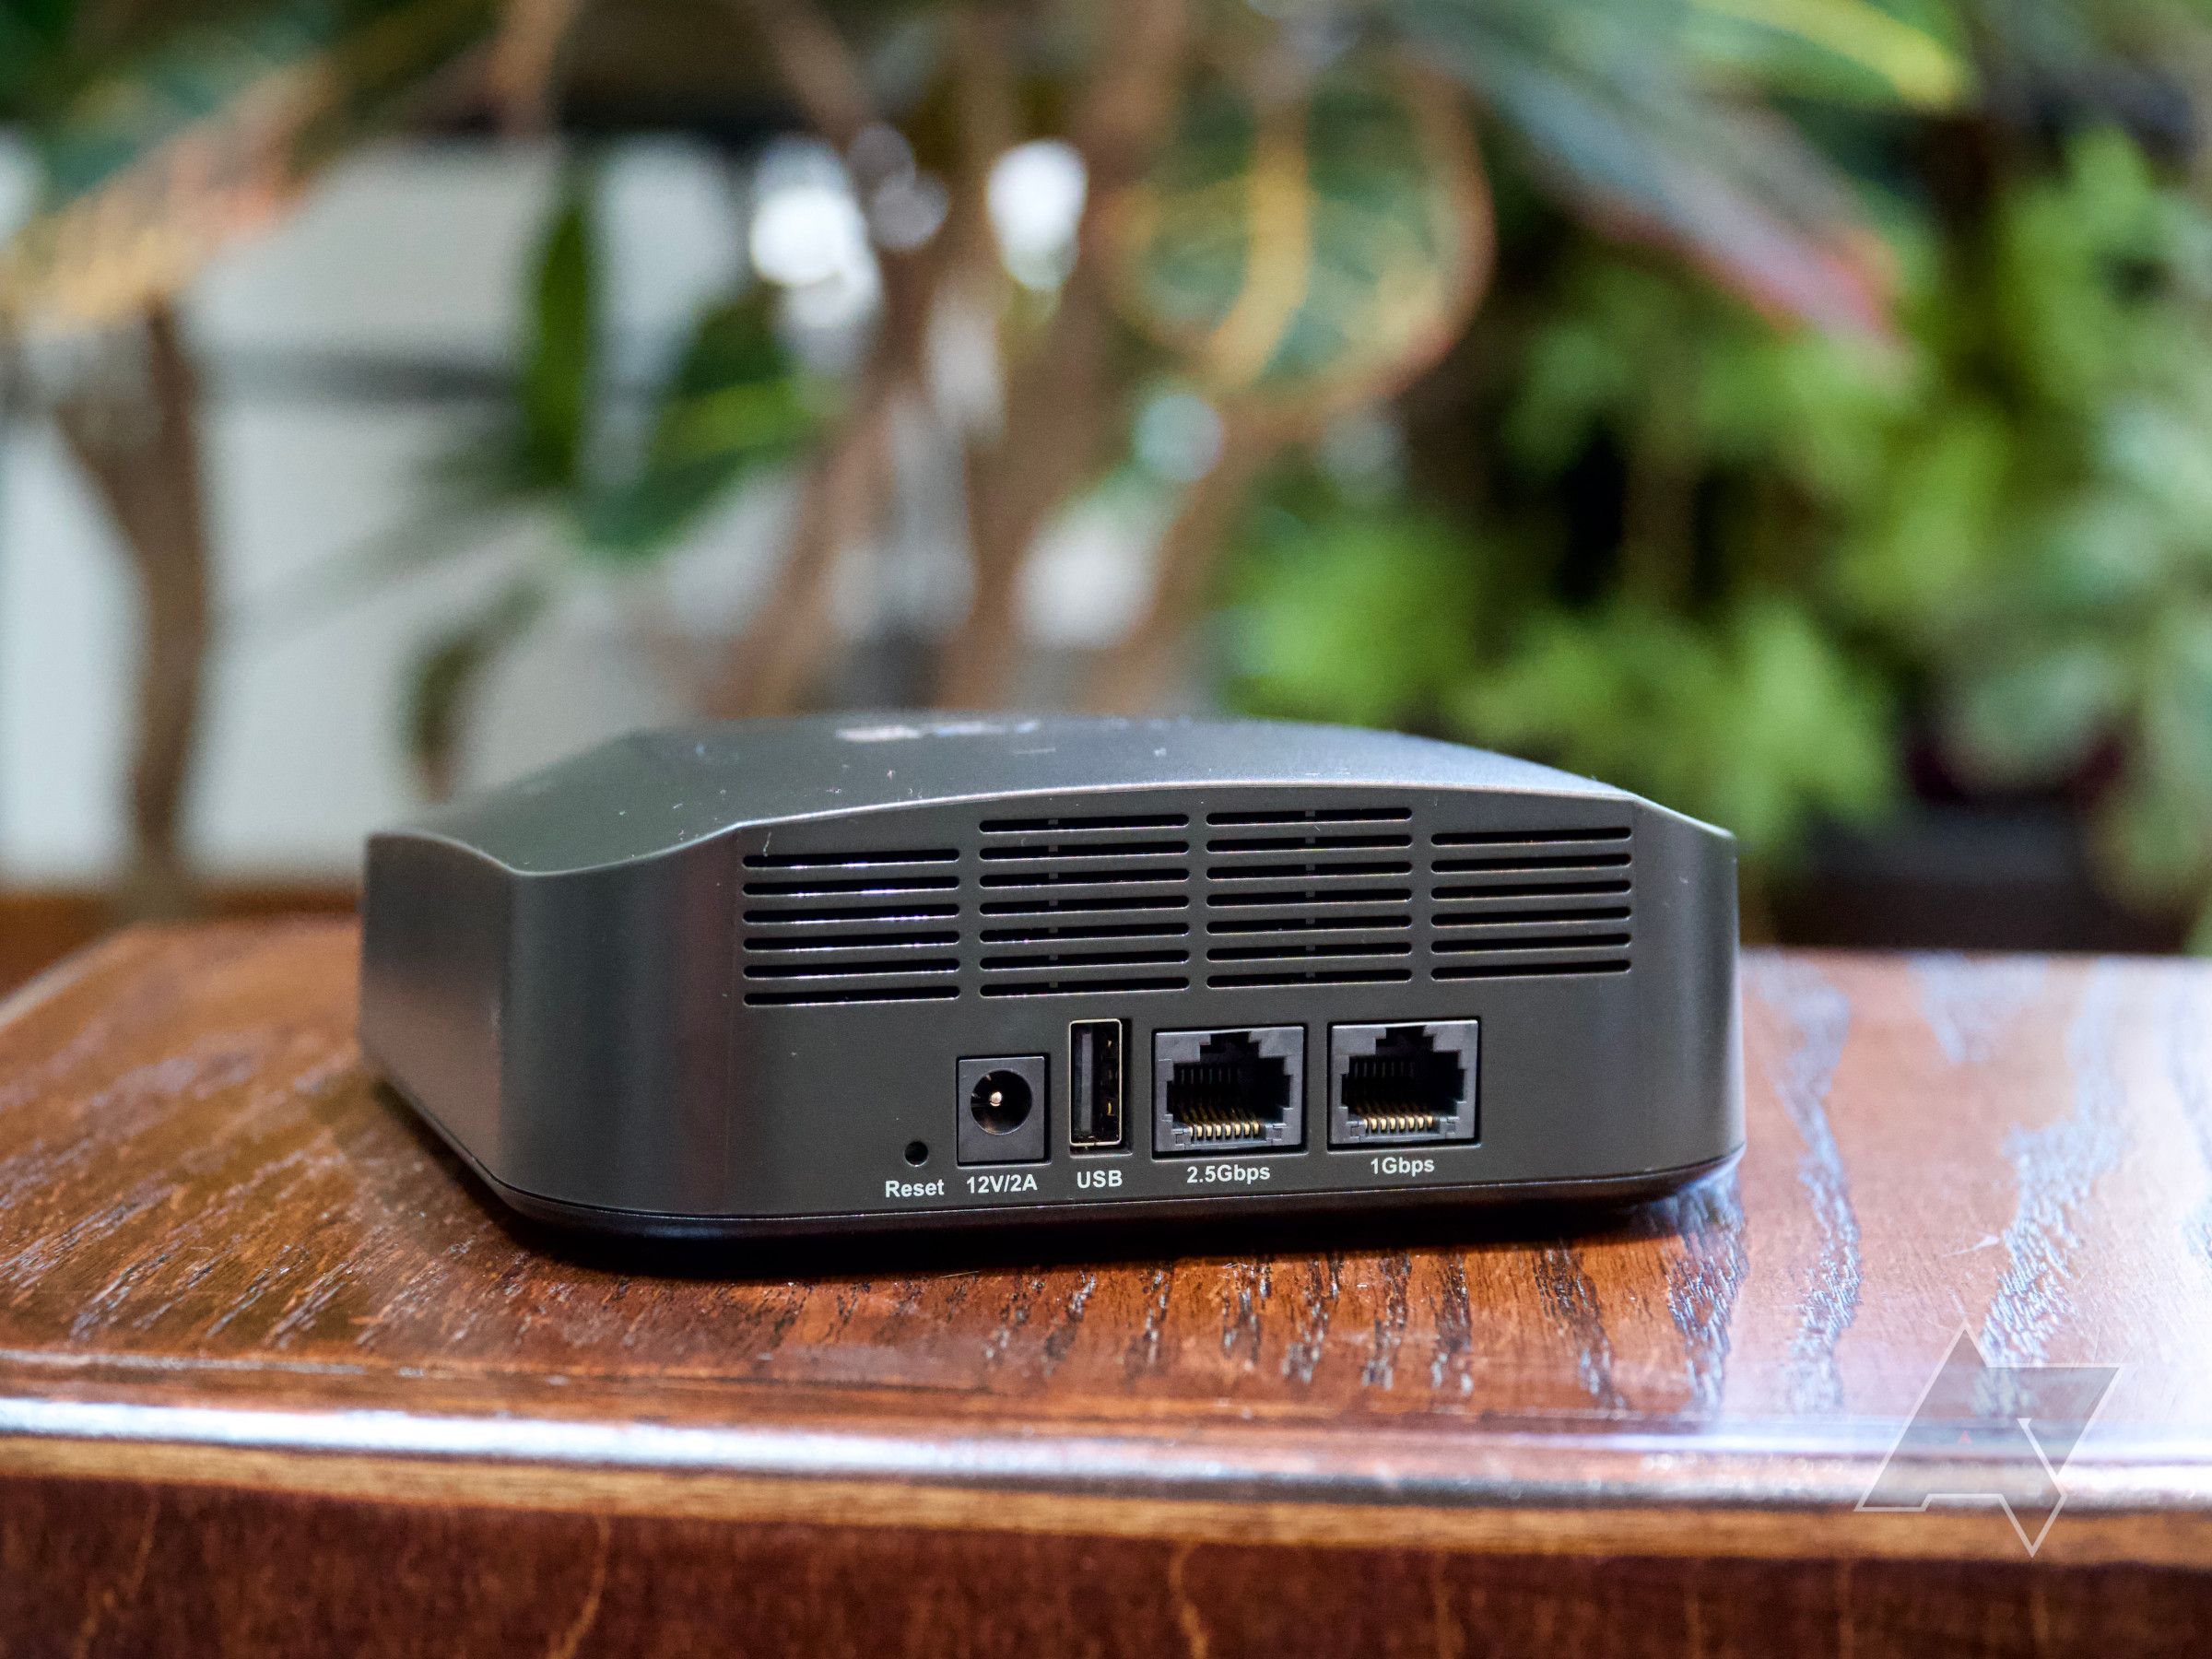 Wyze Mesh Router and Router Pro Review: Can Wyze Conquer Wi-Fi?